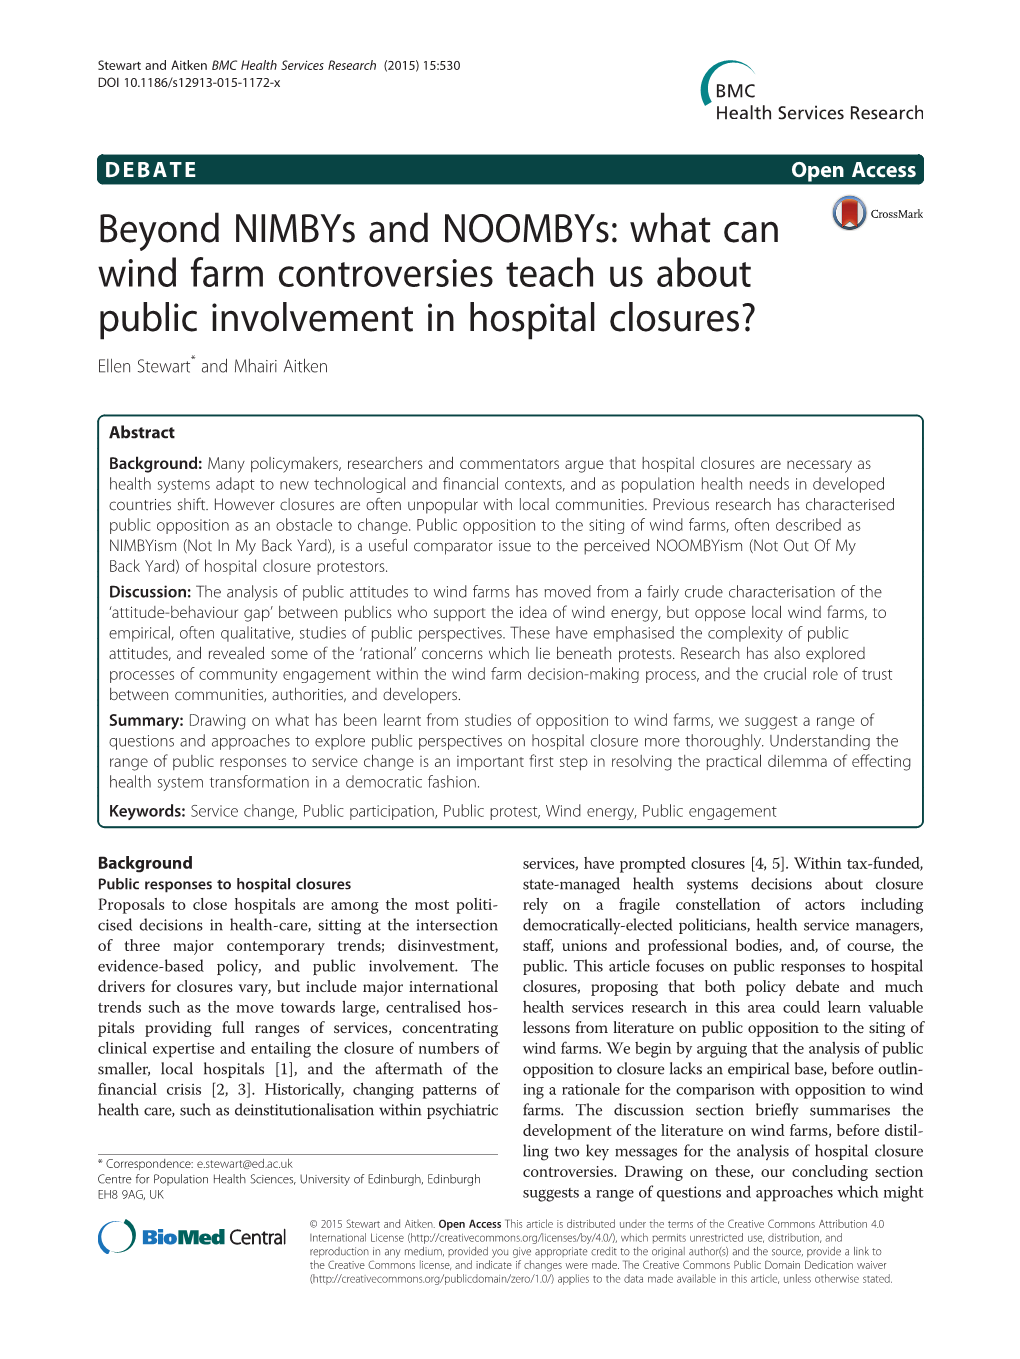 Beyond Nimbys and Noombys: What Can Wind Farm Controversies Teach Us About Public Involvement in Hospital Closures? Ellen Stewart* and Mhairi Aitken